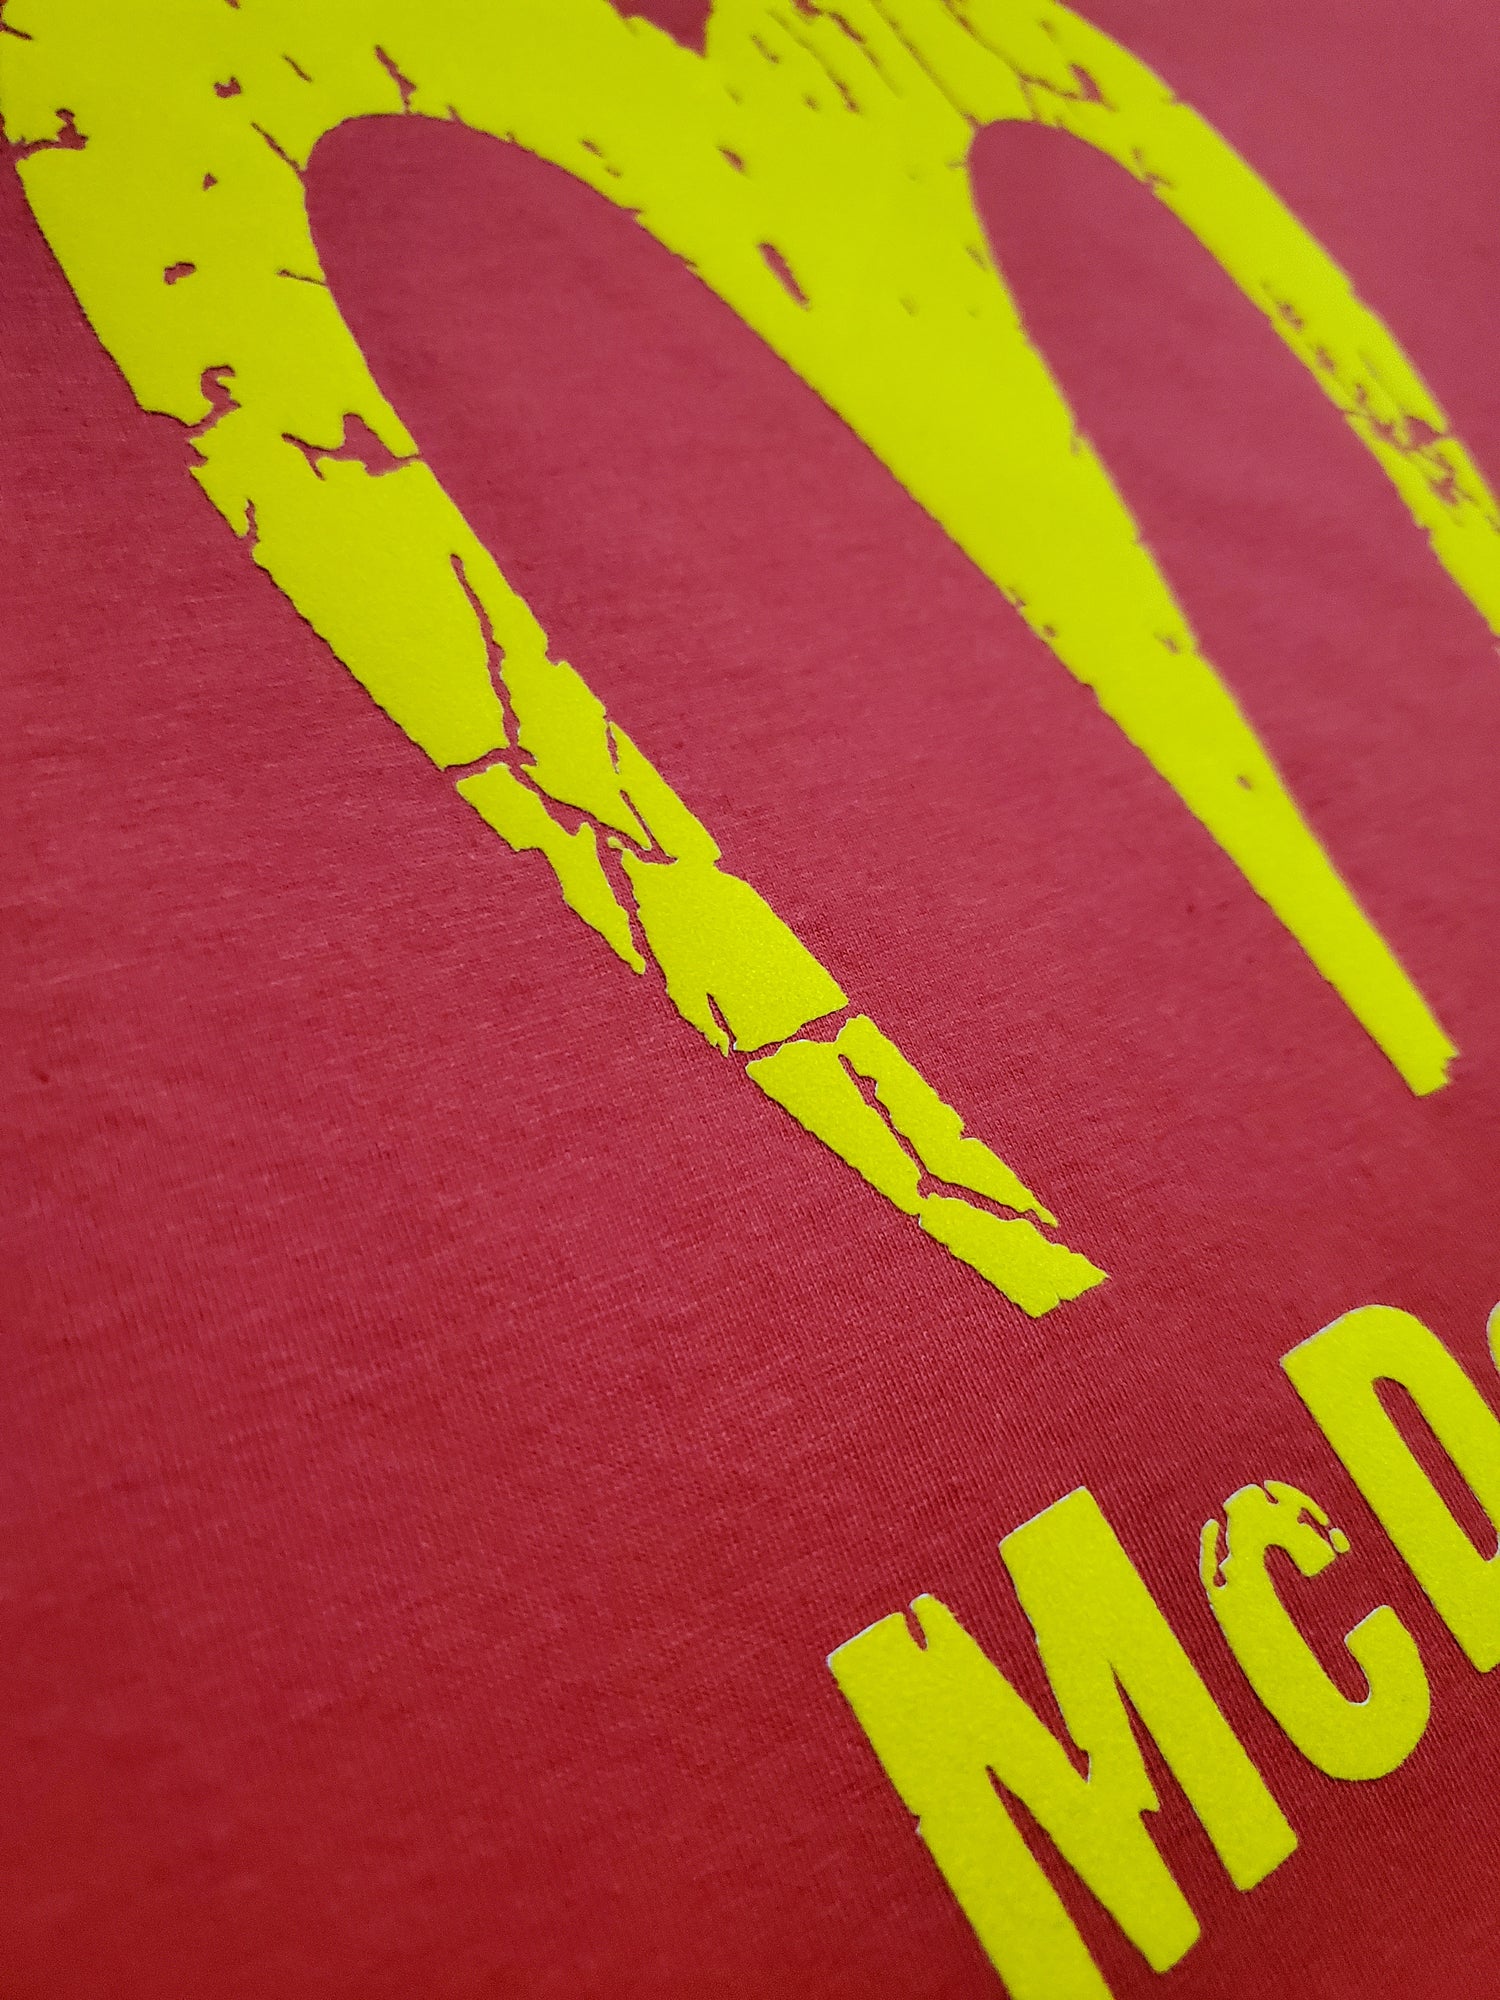 McDowell' s T-Shirt (Crew) - Centre Ave Clothing Co.